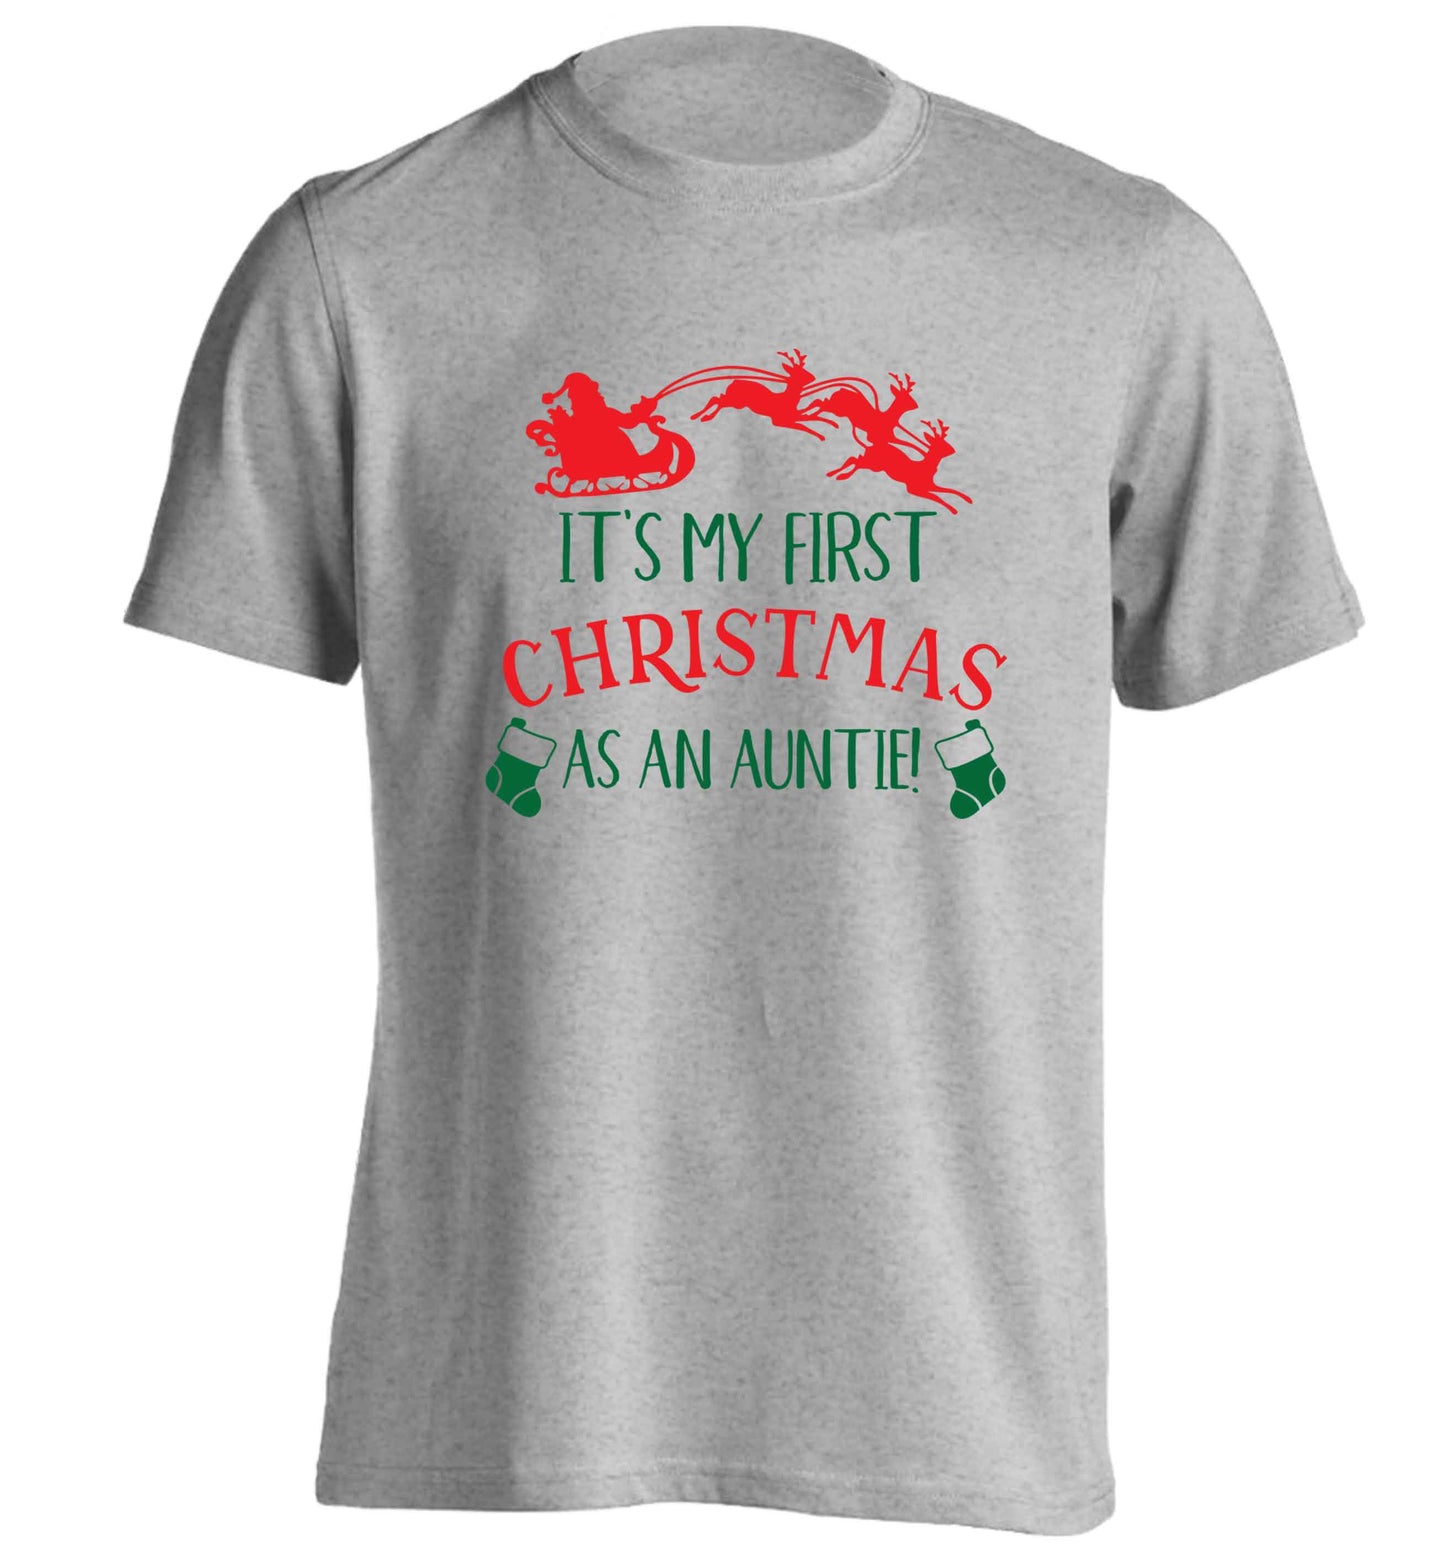 It's my first Christmas as an auntie! adults unisex grey Tshirt 2XL